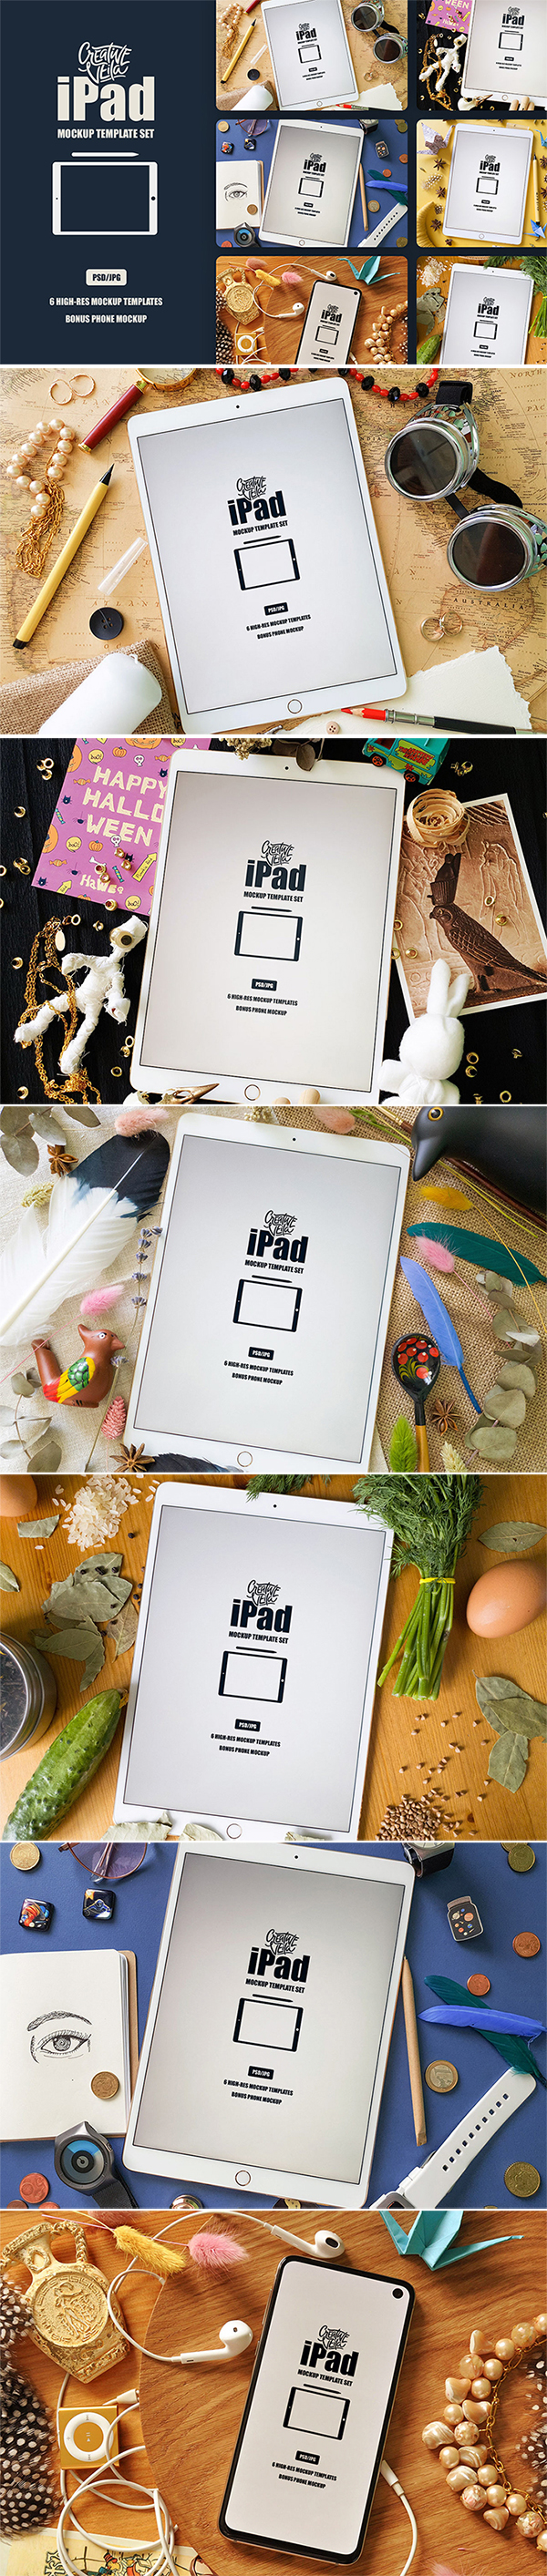 Free Download Awesome High Resolution iPad Mockup Templates